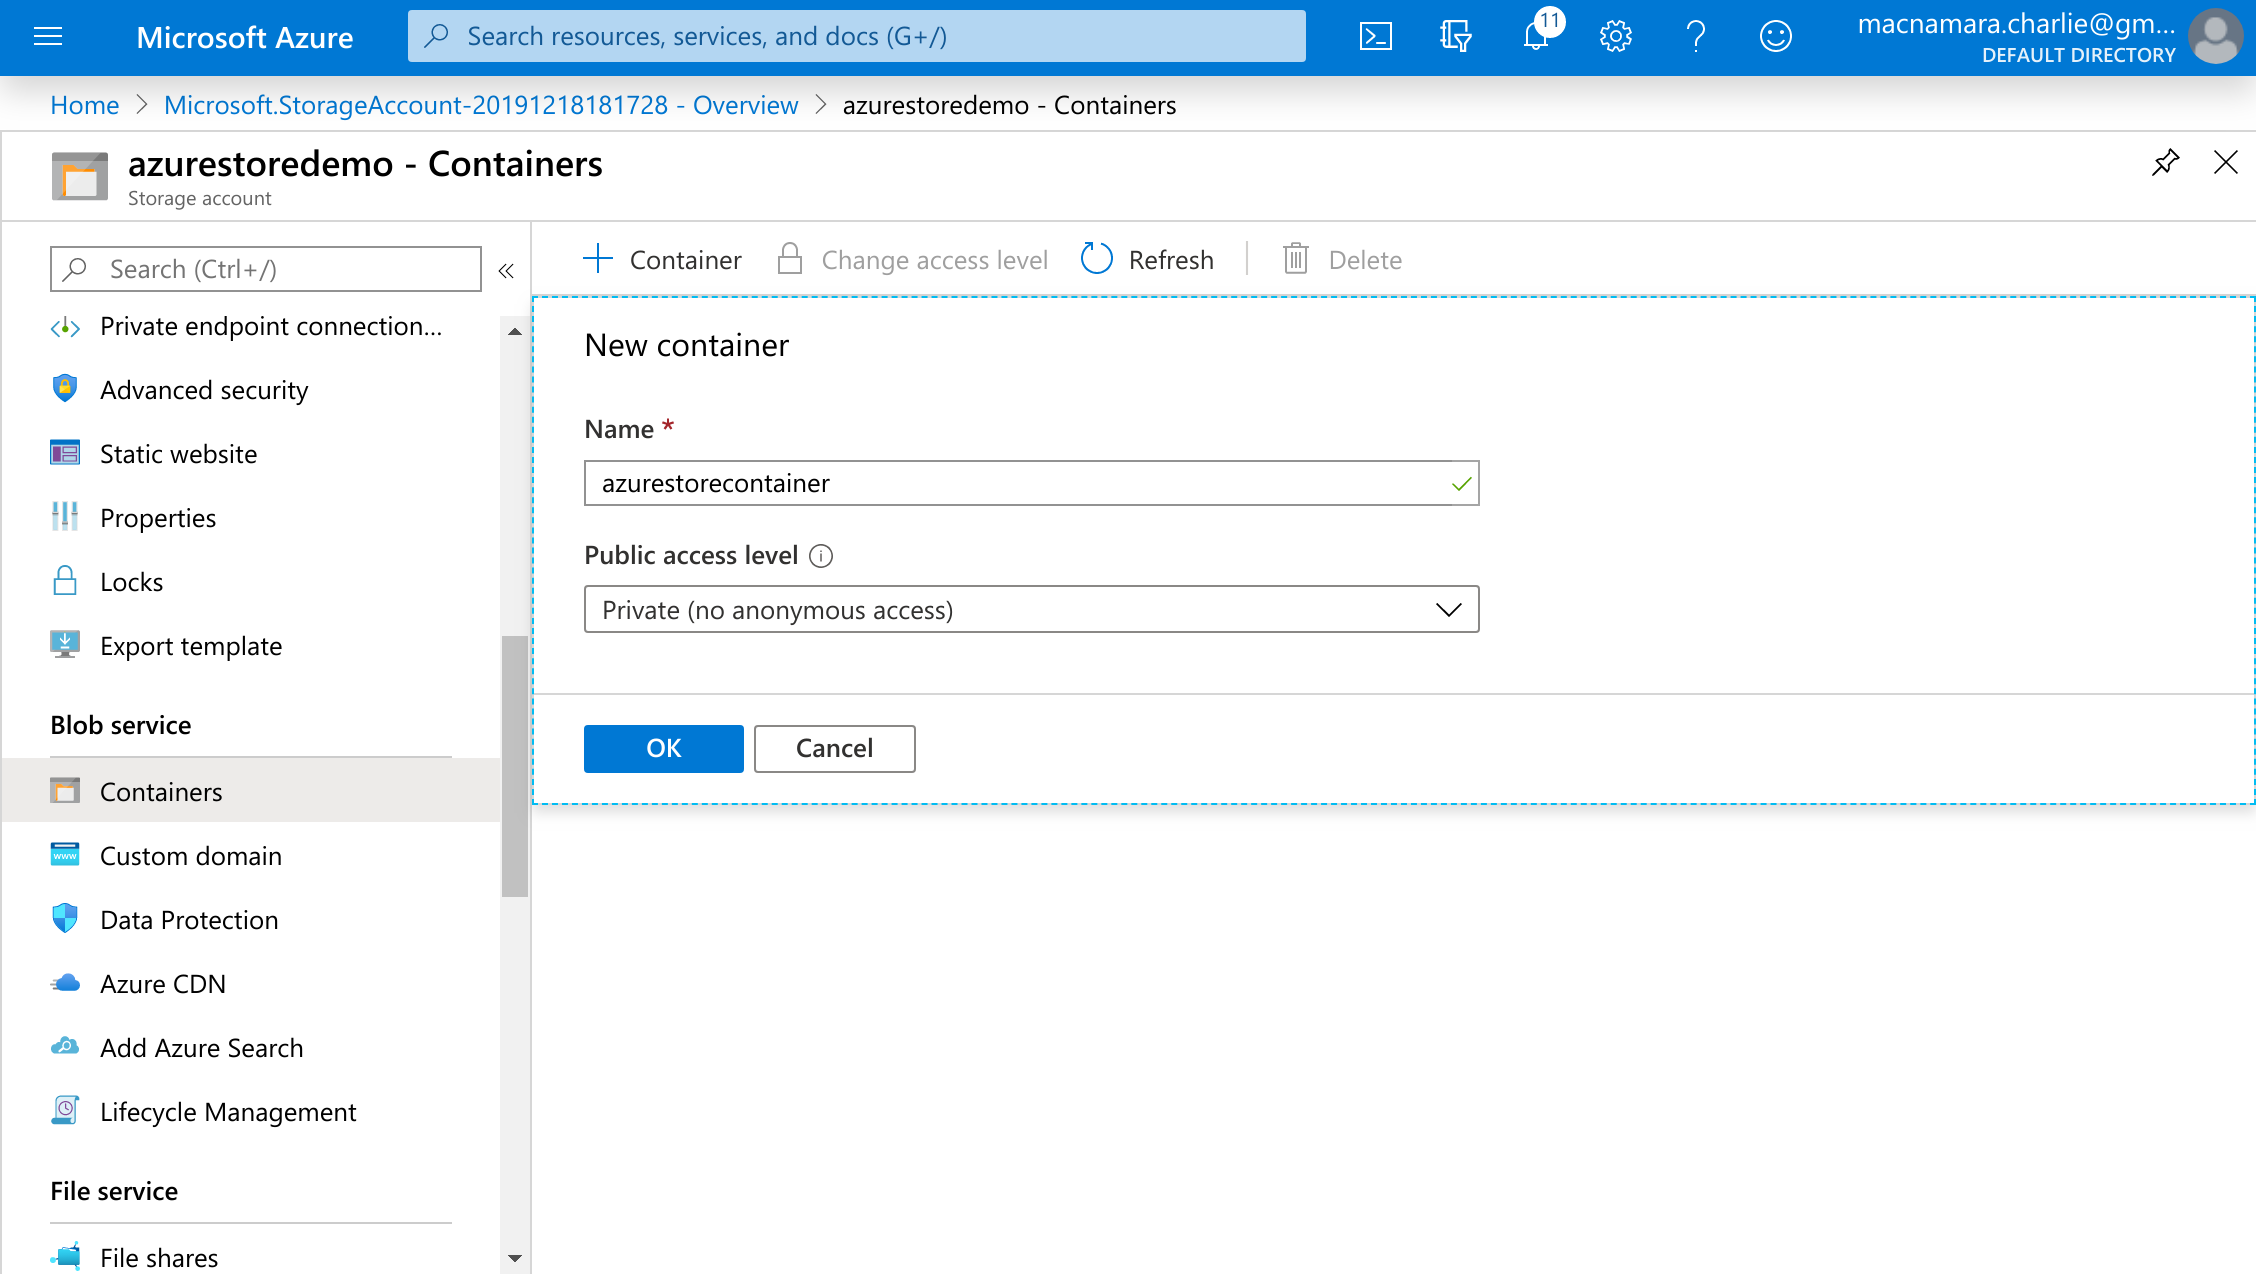 The 'Create Containers' page, with the name set to 'azurestorecontainer' and the Public access level set to 'Private.